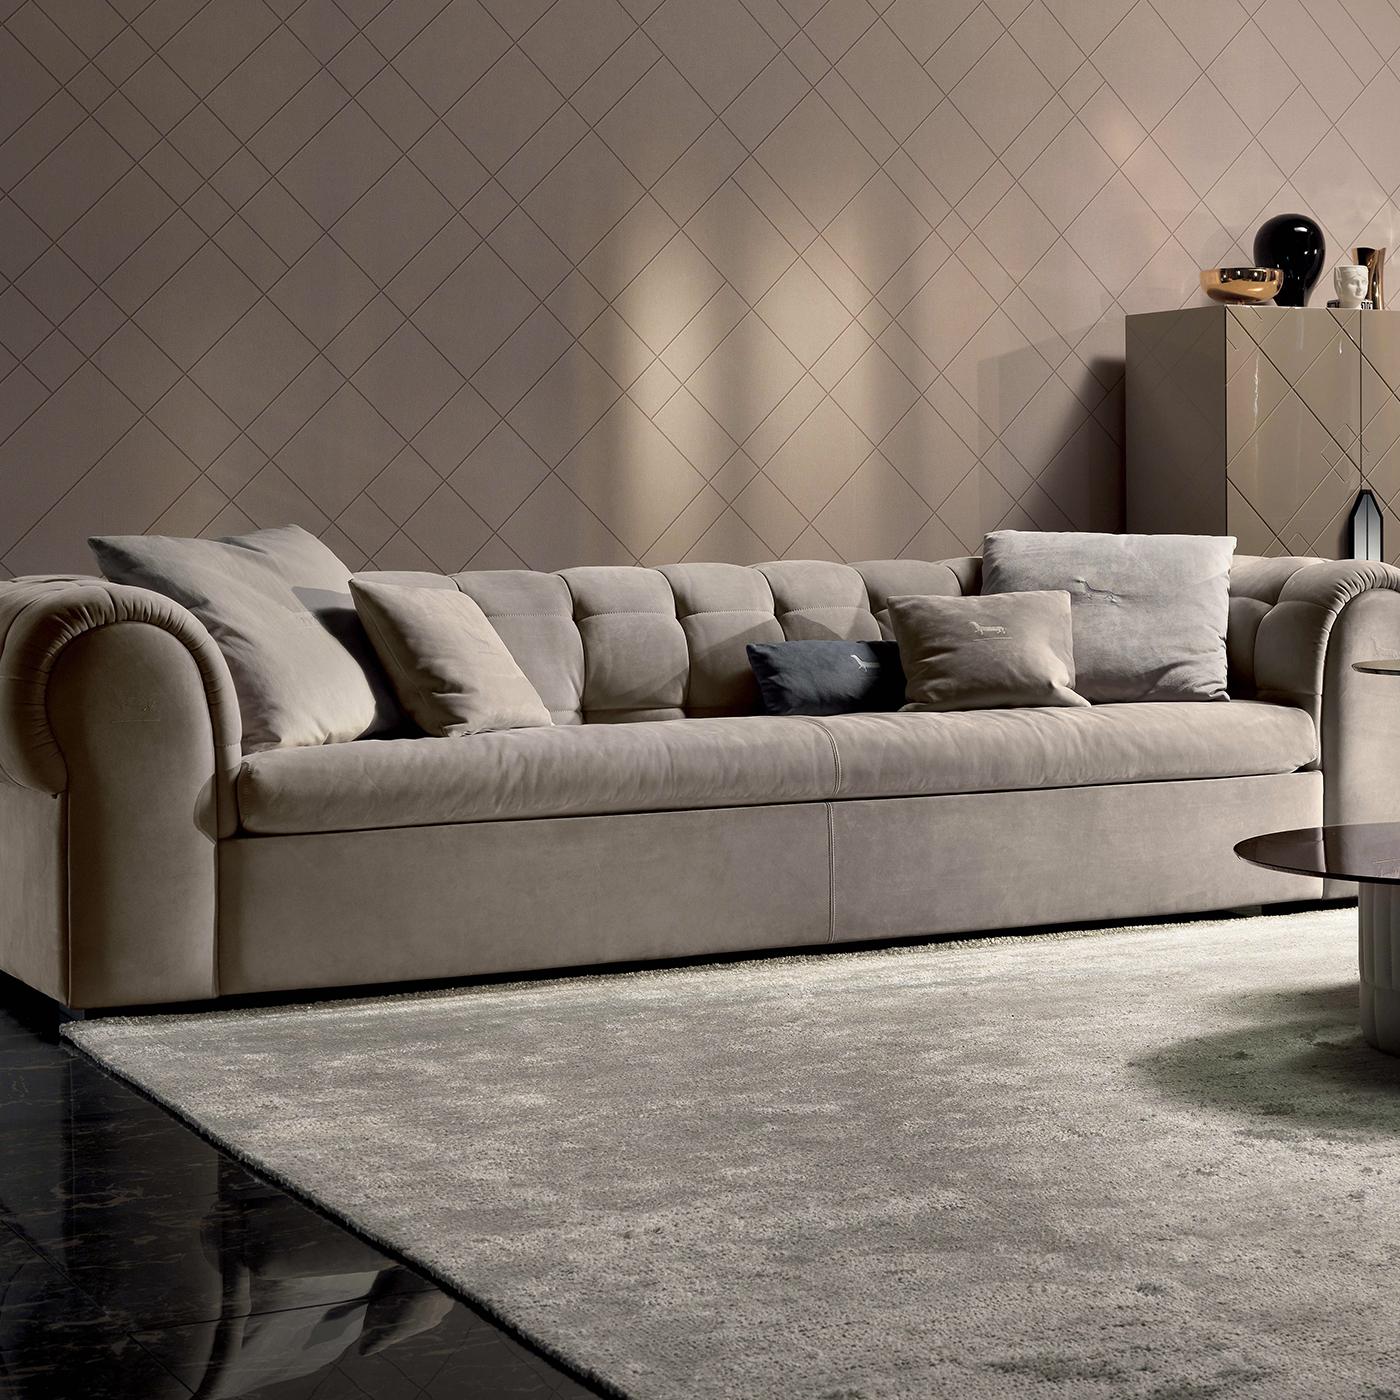 Boasting a Chesterfield-inspired silhouette, this sofa will complement any traditional, modern, boho, or contemporary living room. Entirely handcrafted of a solid wood structure with a lower stance and deep seat, the welcoming Silhouette features